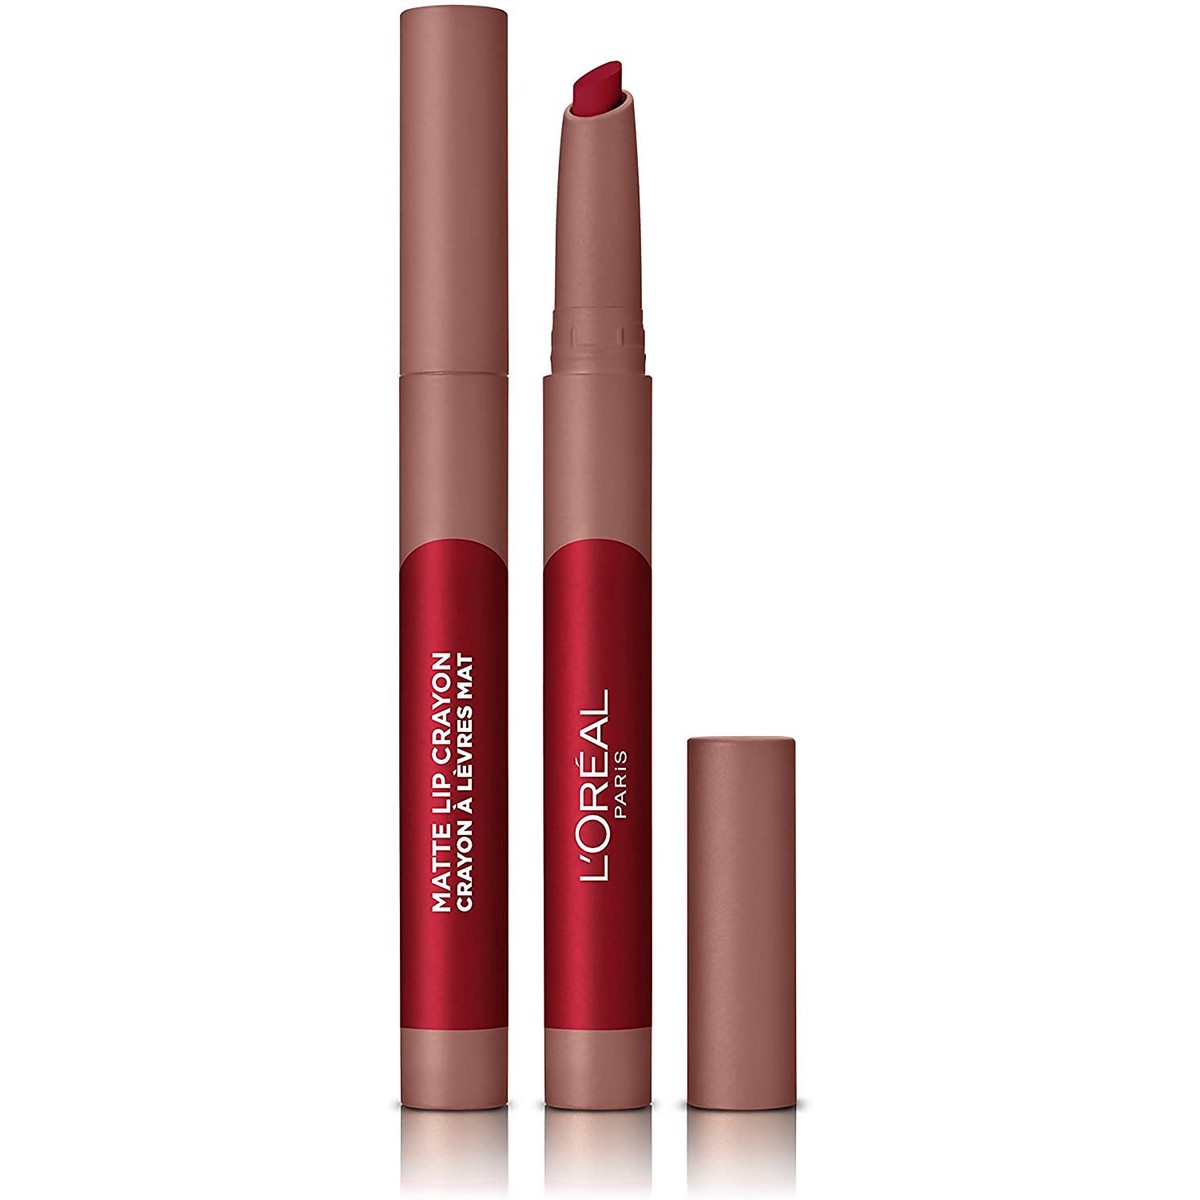 Lipstick L'Oreal Make Up Infaillible 113-brulee everyday (2,5 g)